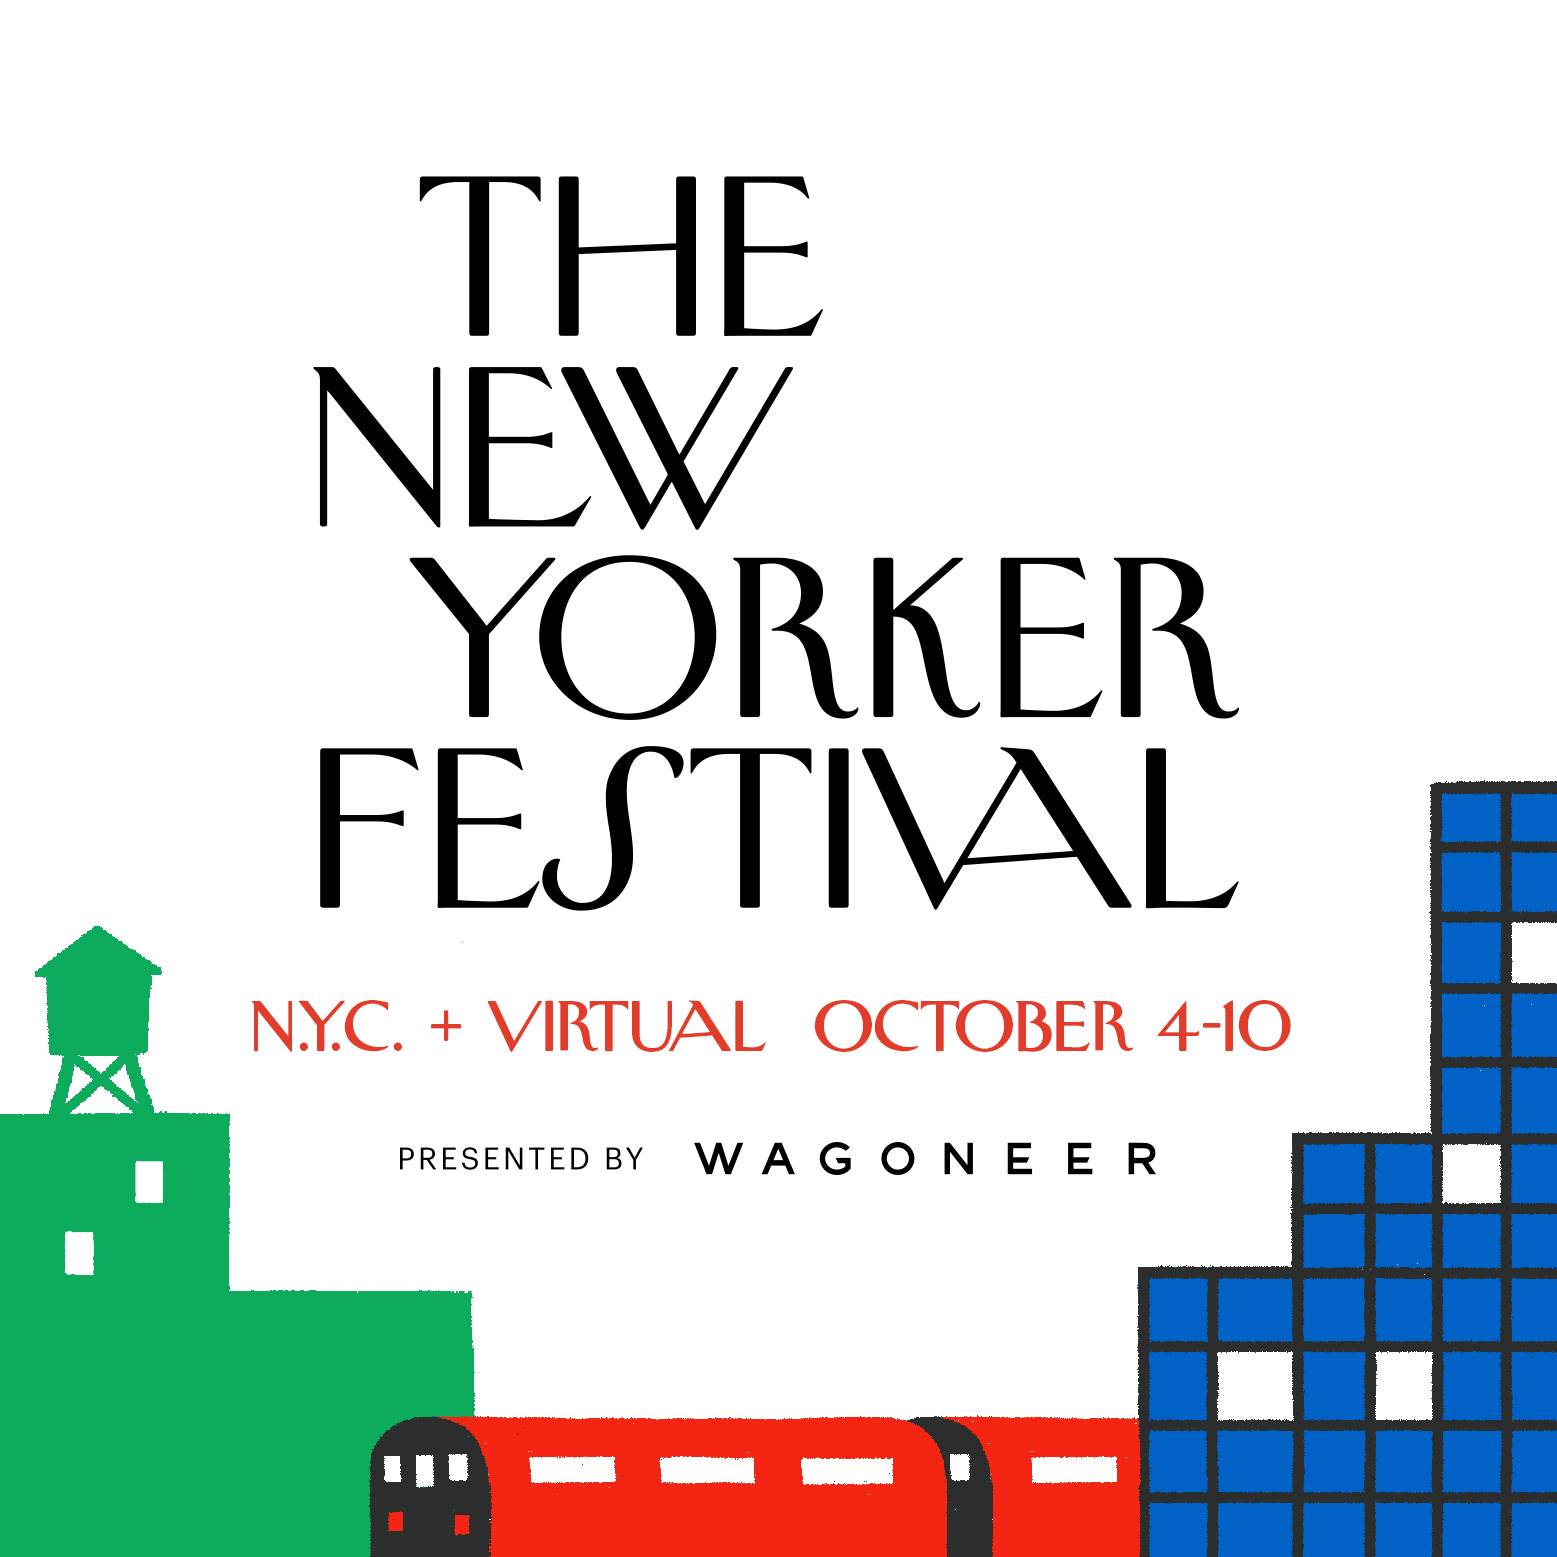 Condé Nast The New Yorker Festival Returns, in New York City and